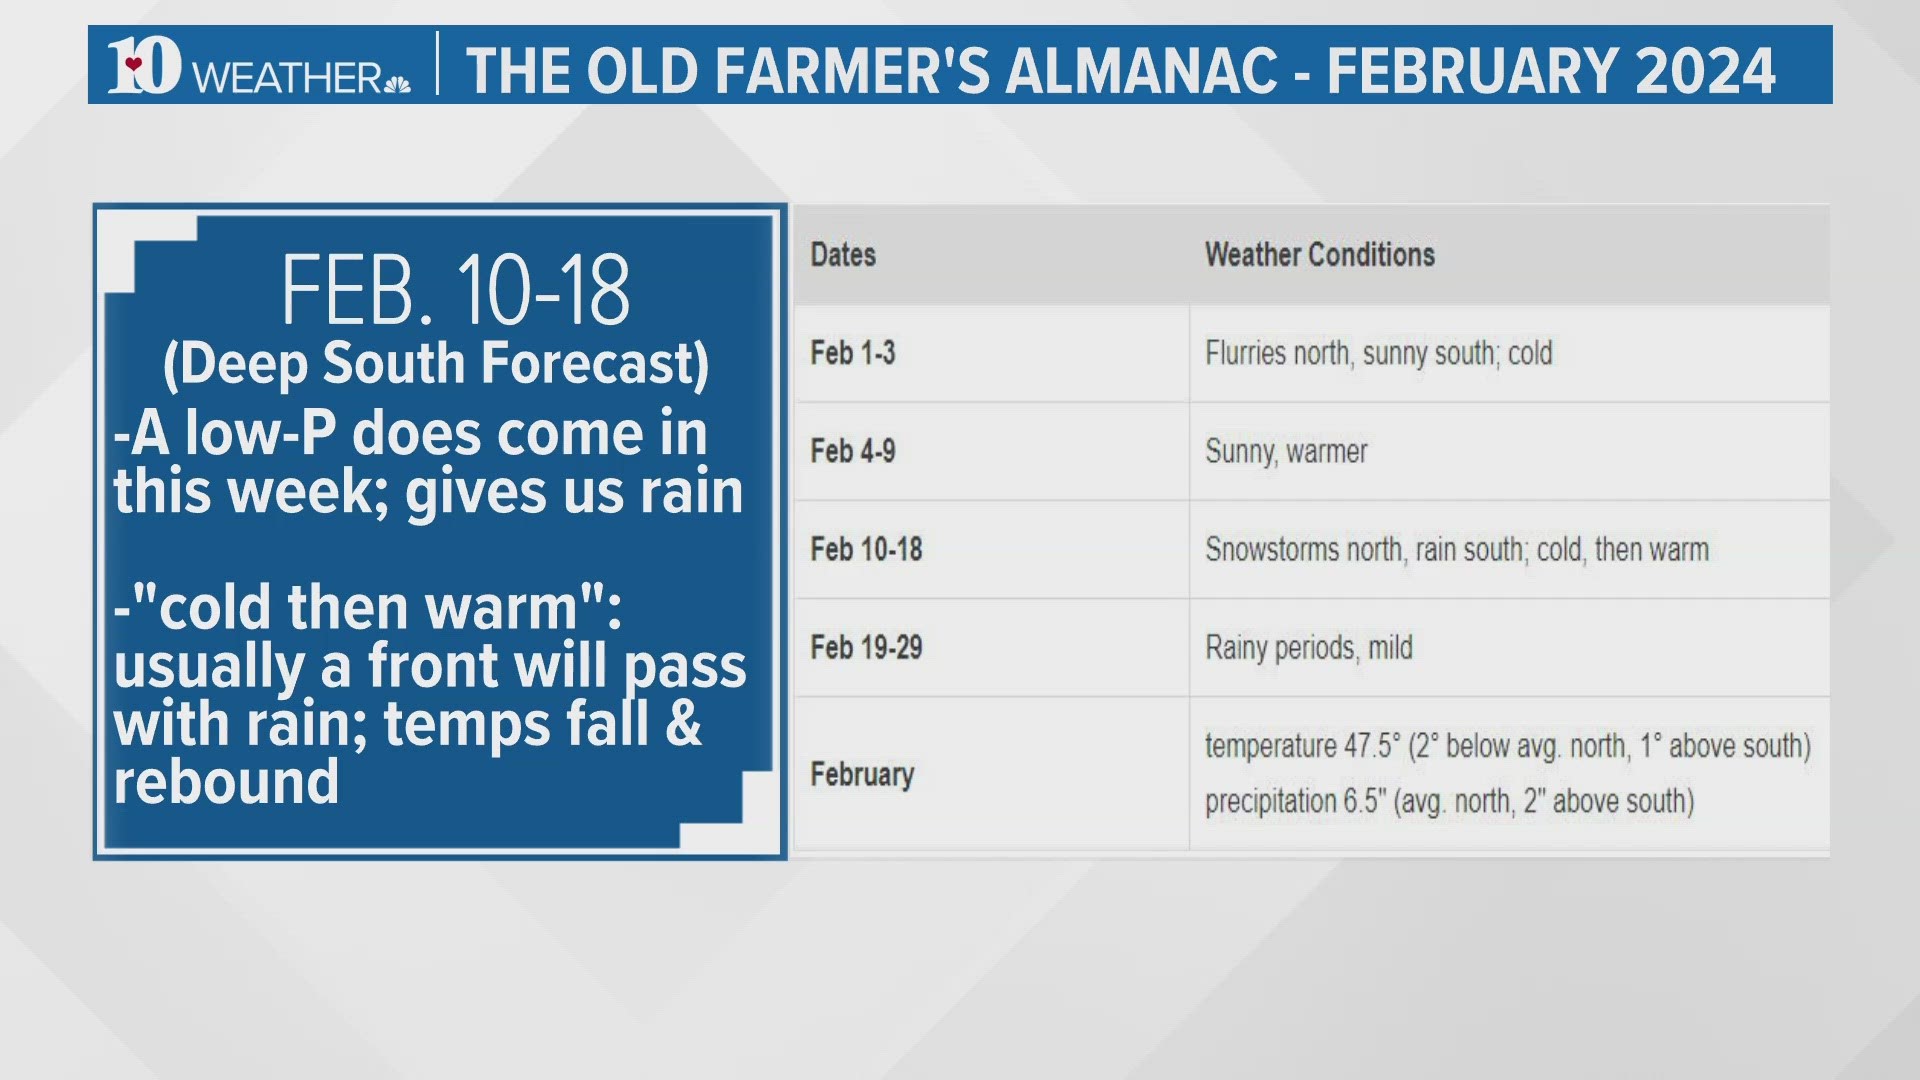 One viewer wanted to know if it's true that Farmers Almanac is predicting another large snowstorm.